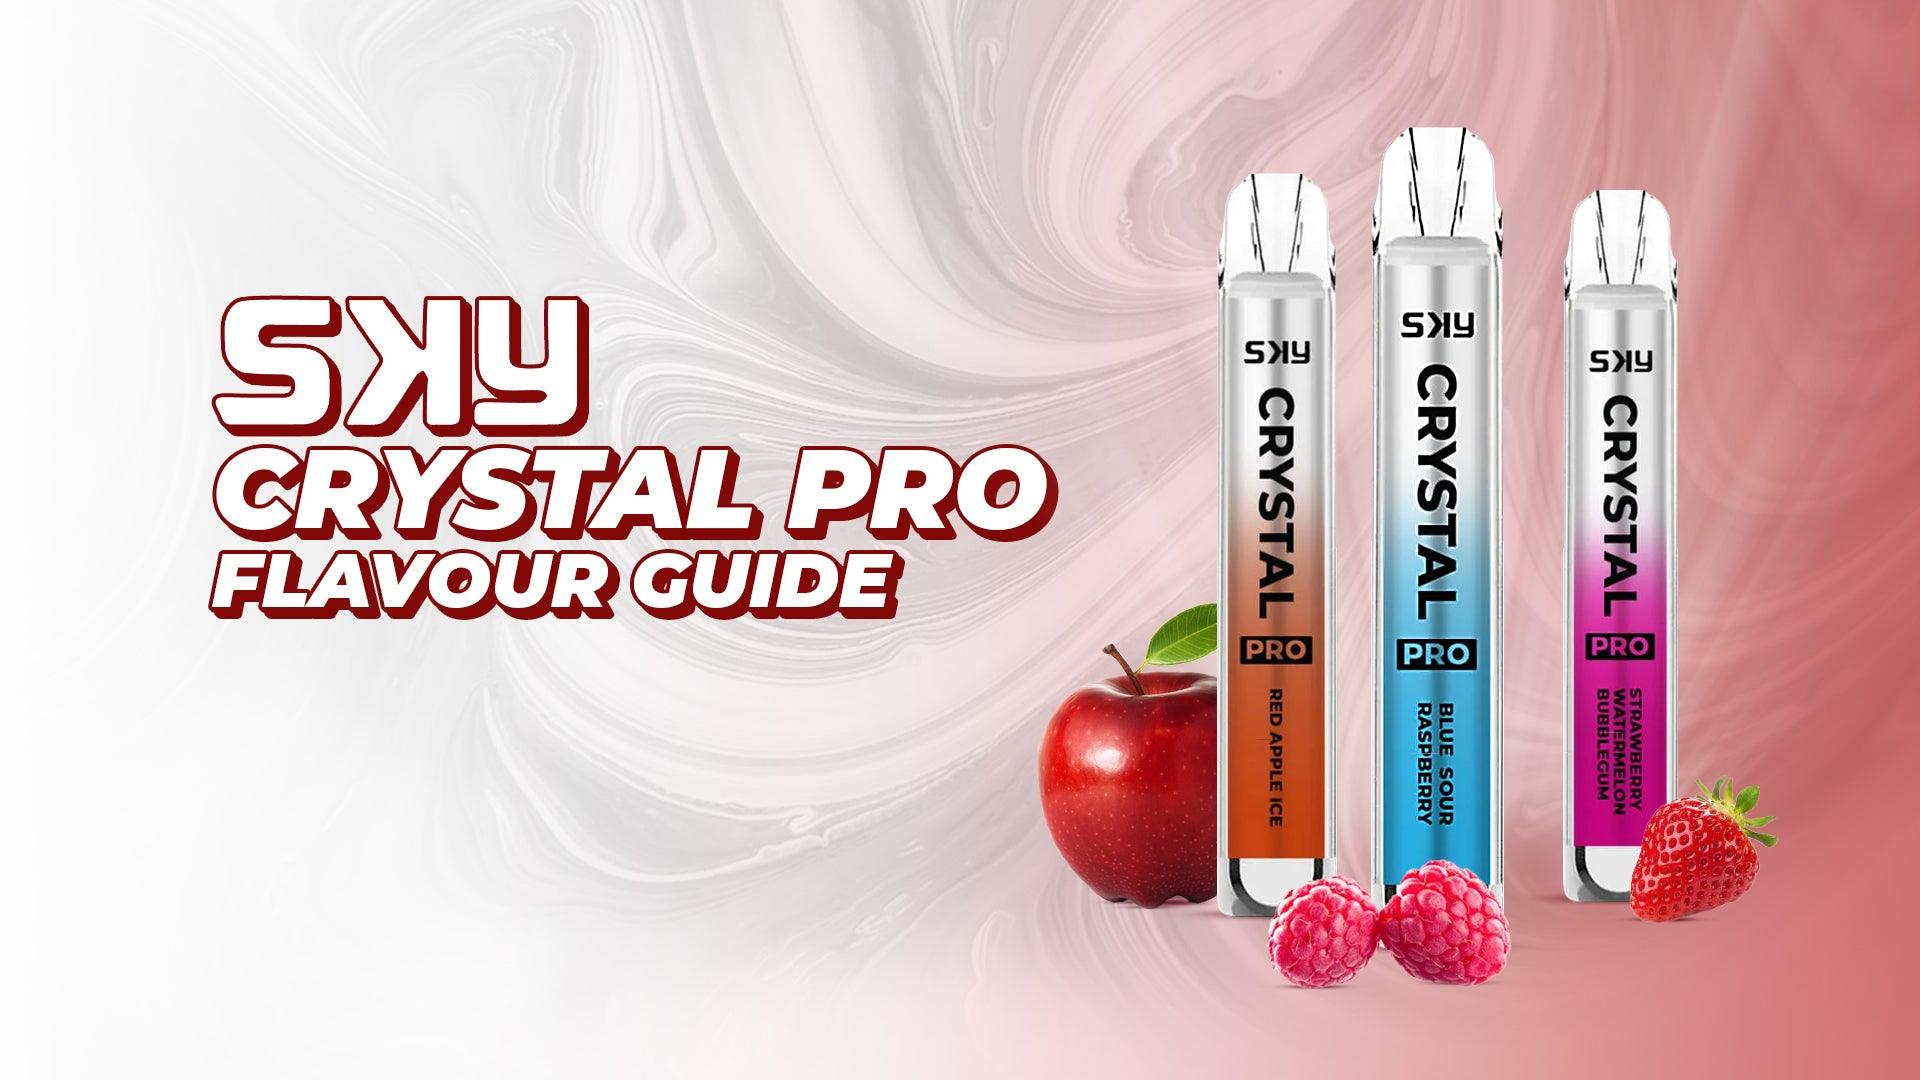 Sky Crystal Pro Flavour Guide